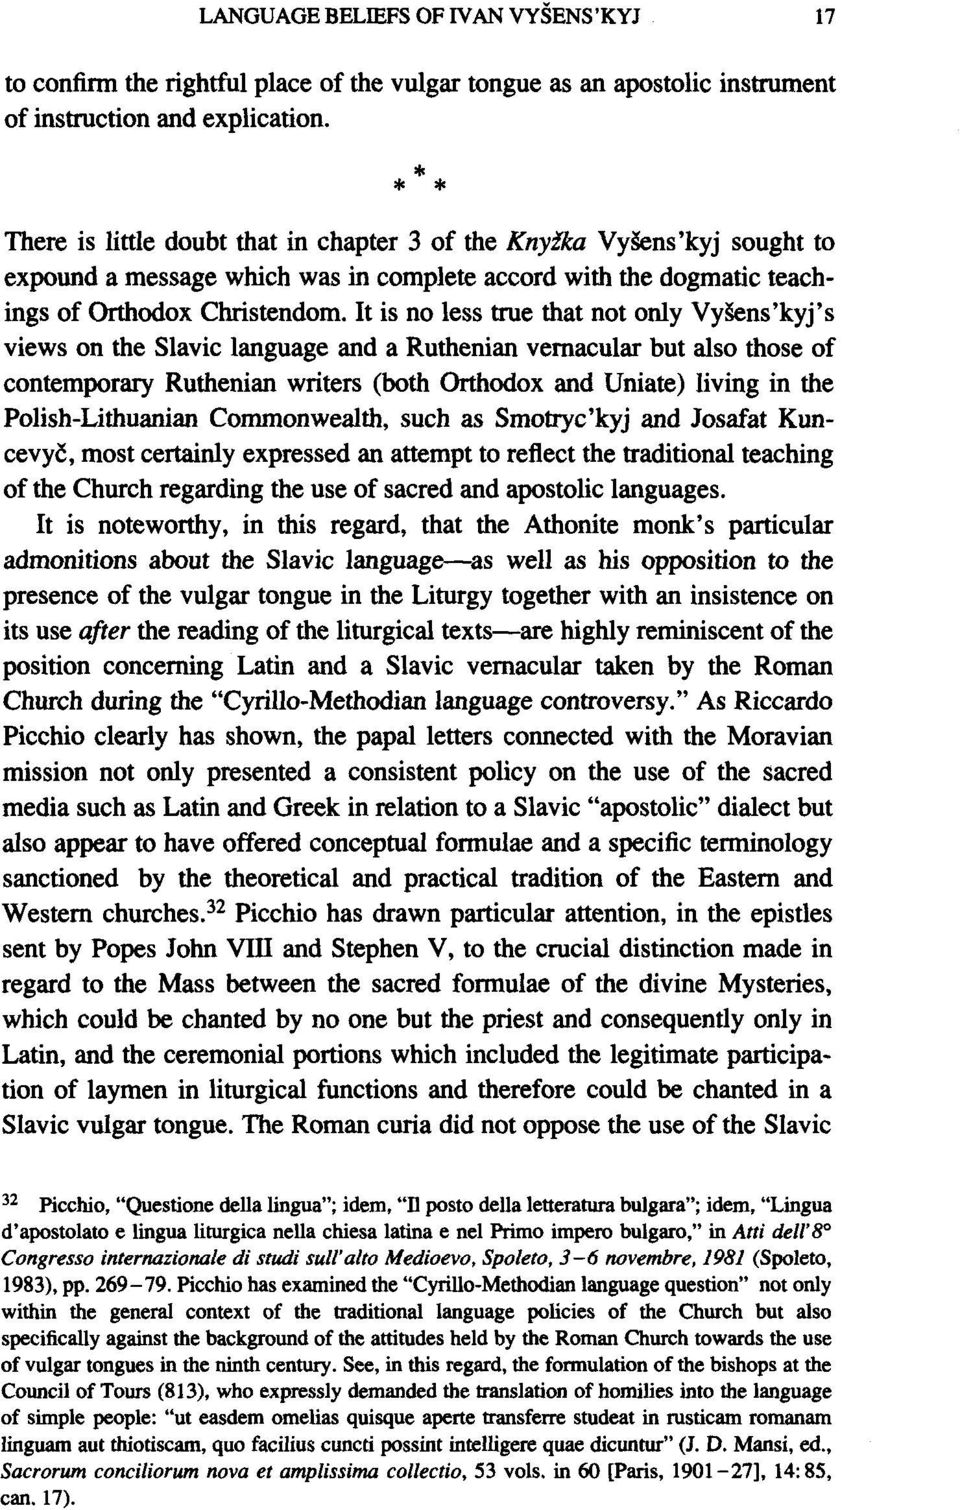 It is no less true that not only Vysens'kyj's views on the Slavic language and a Ruthenian vernacular but also those of contemporary Ruthenian writers (both Orthodox and Uniate) living in the